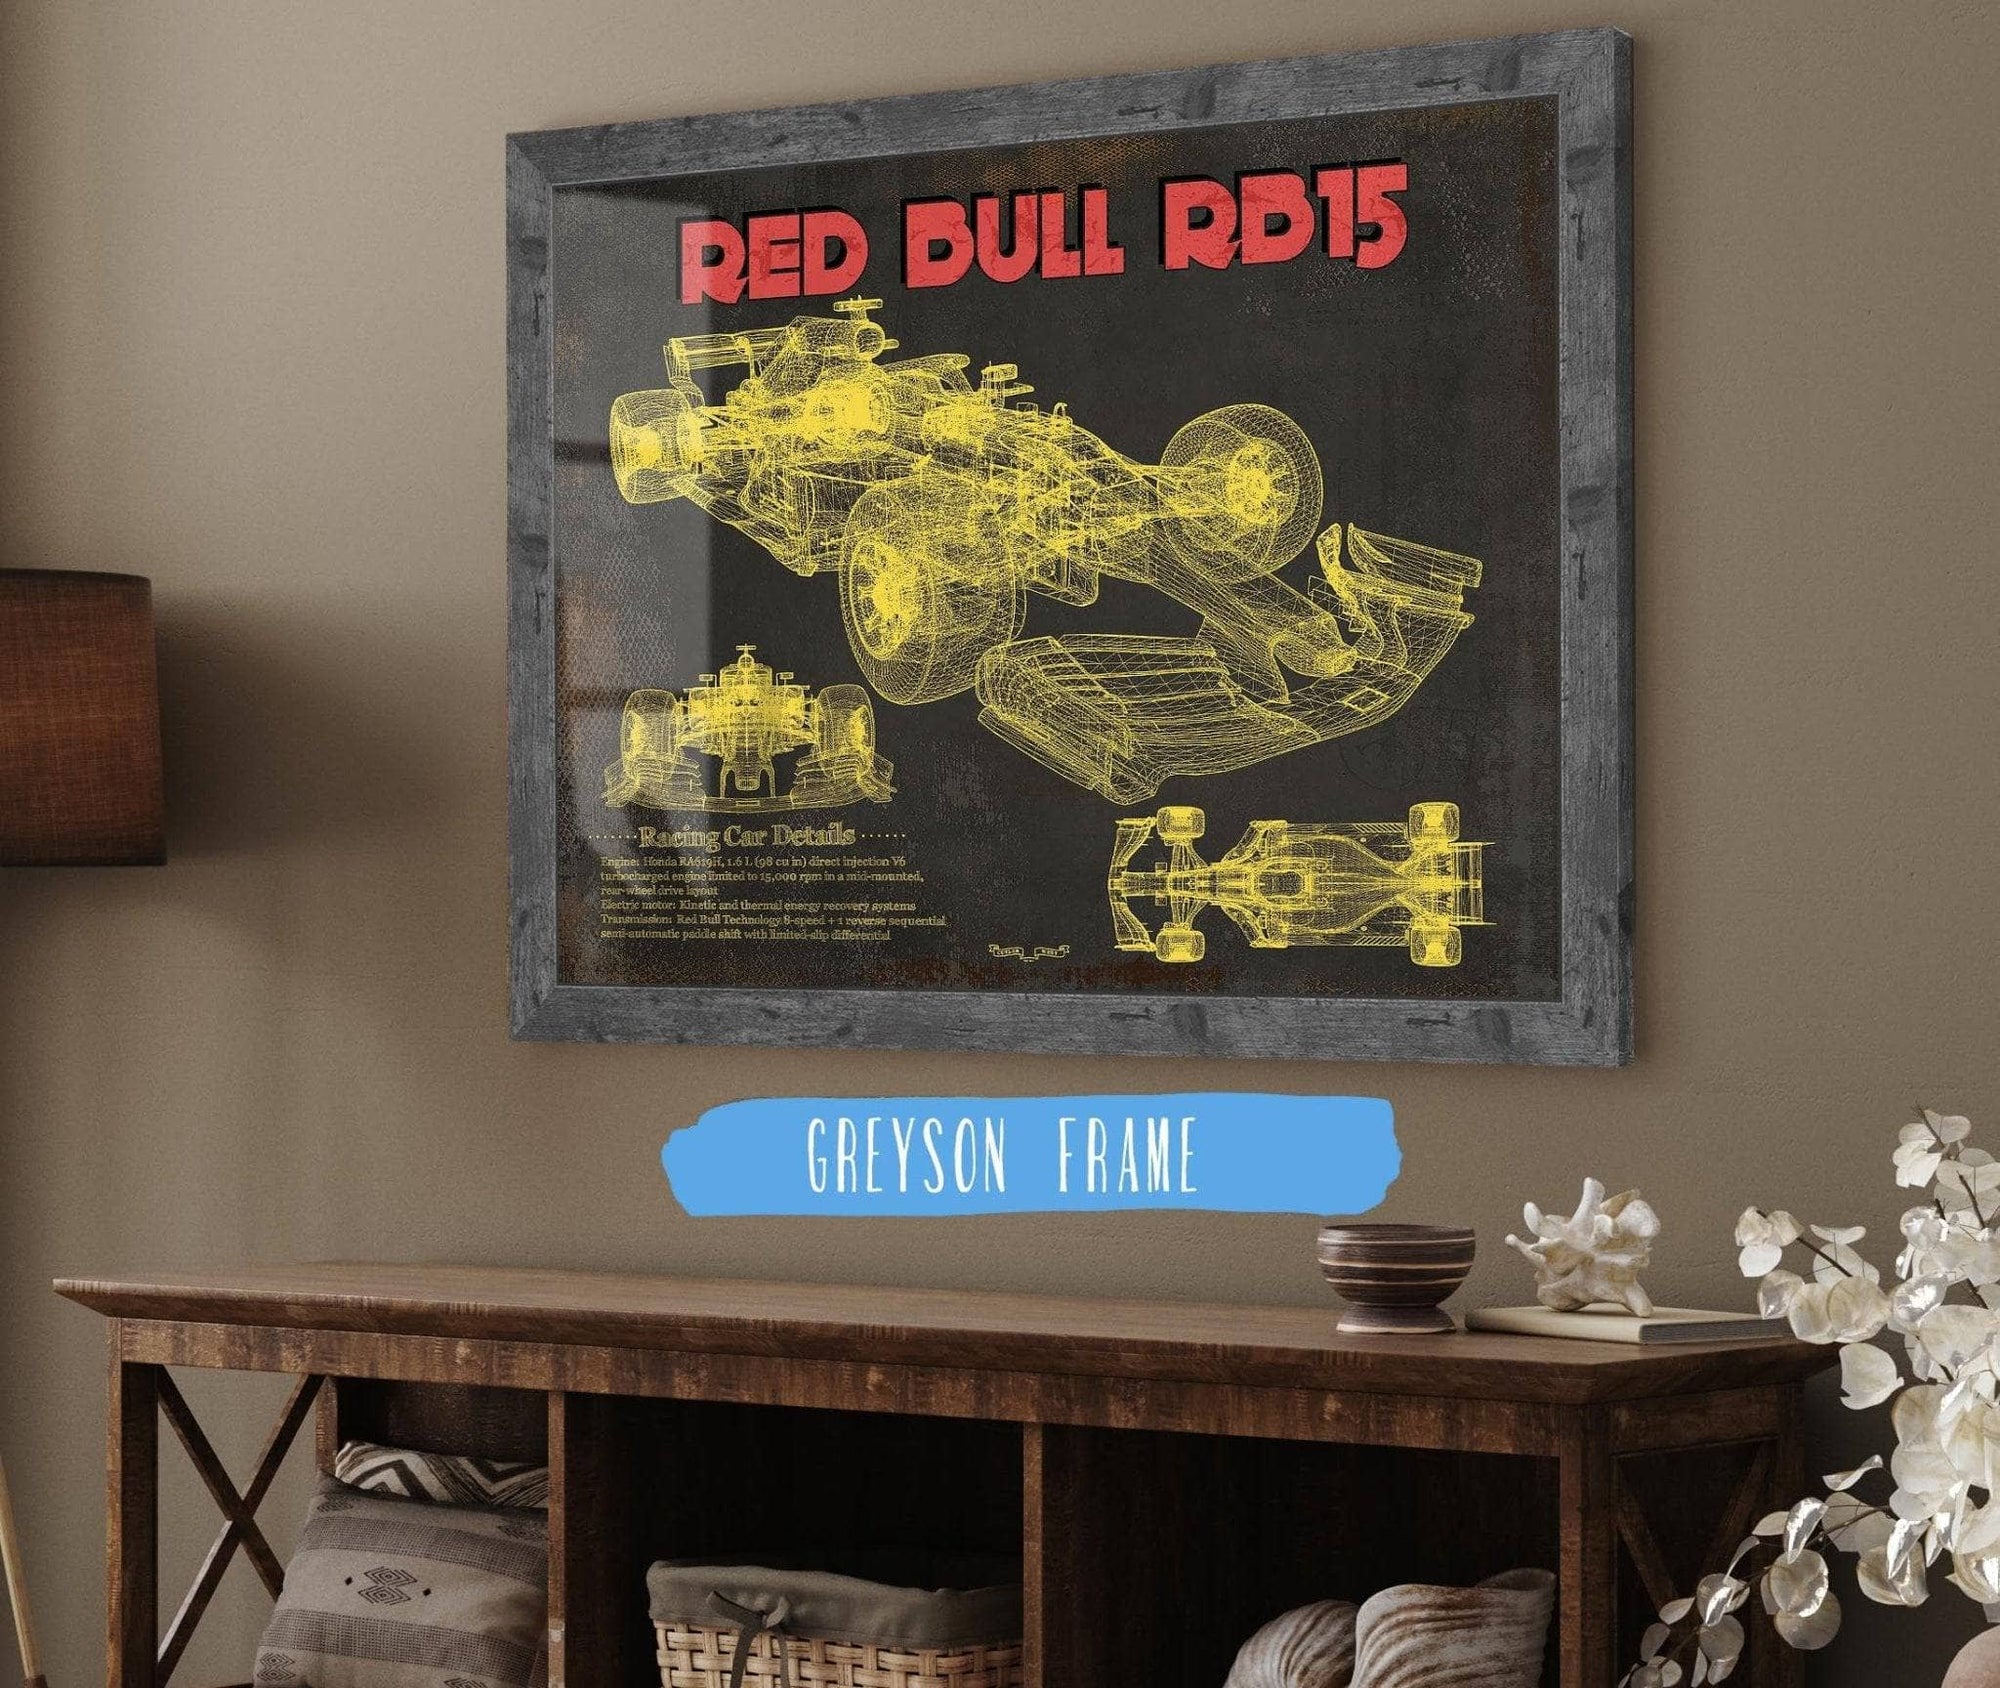 Cutler West Vehicle Collection Red Bull RB15 2019 Formula One Race Car Print